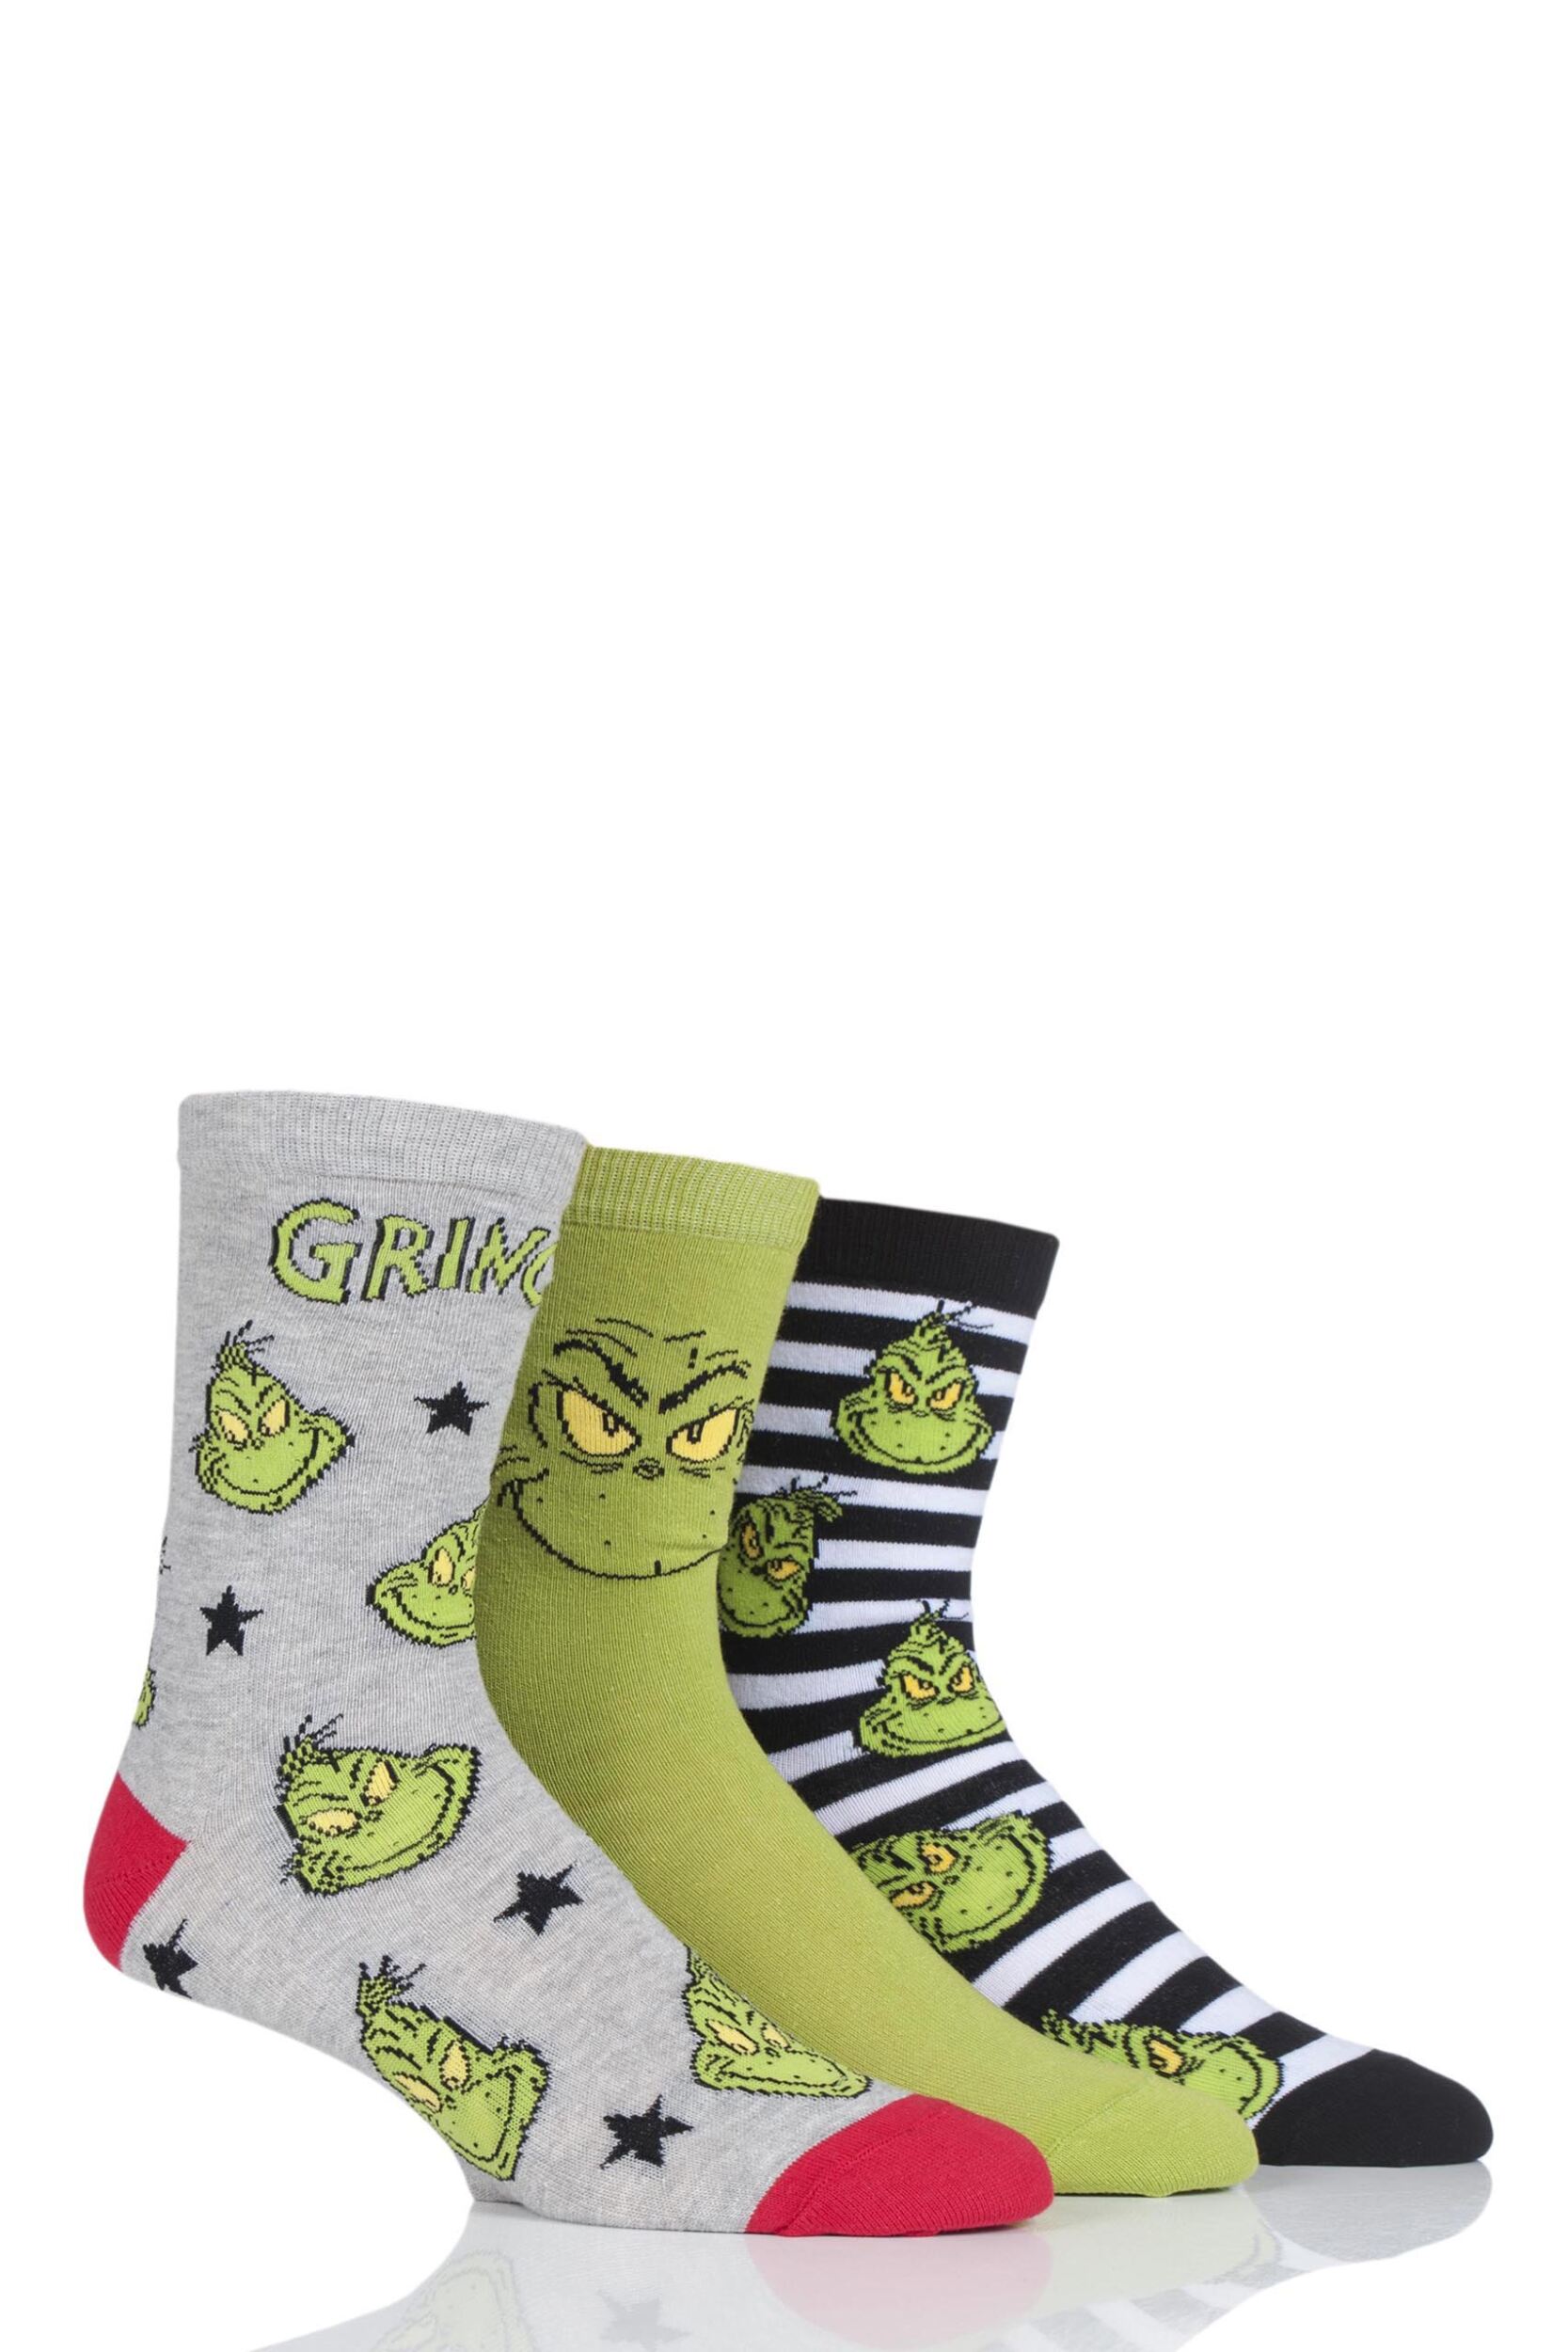 3 Pair Assorted Grinch Cotton Socks Unisex 6-11 Mens - Film & TV Characters